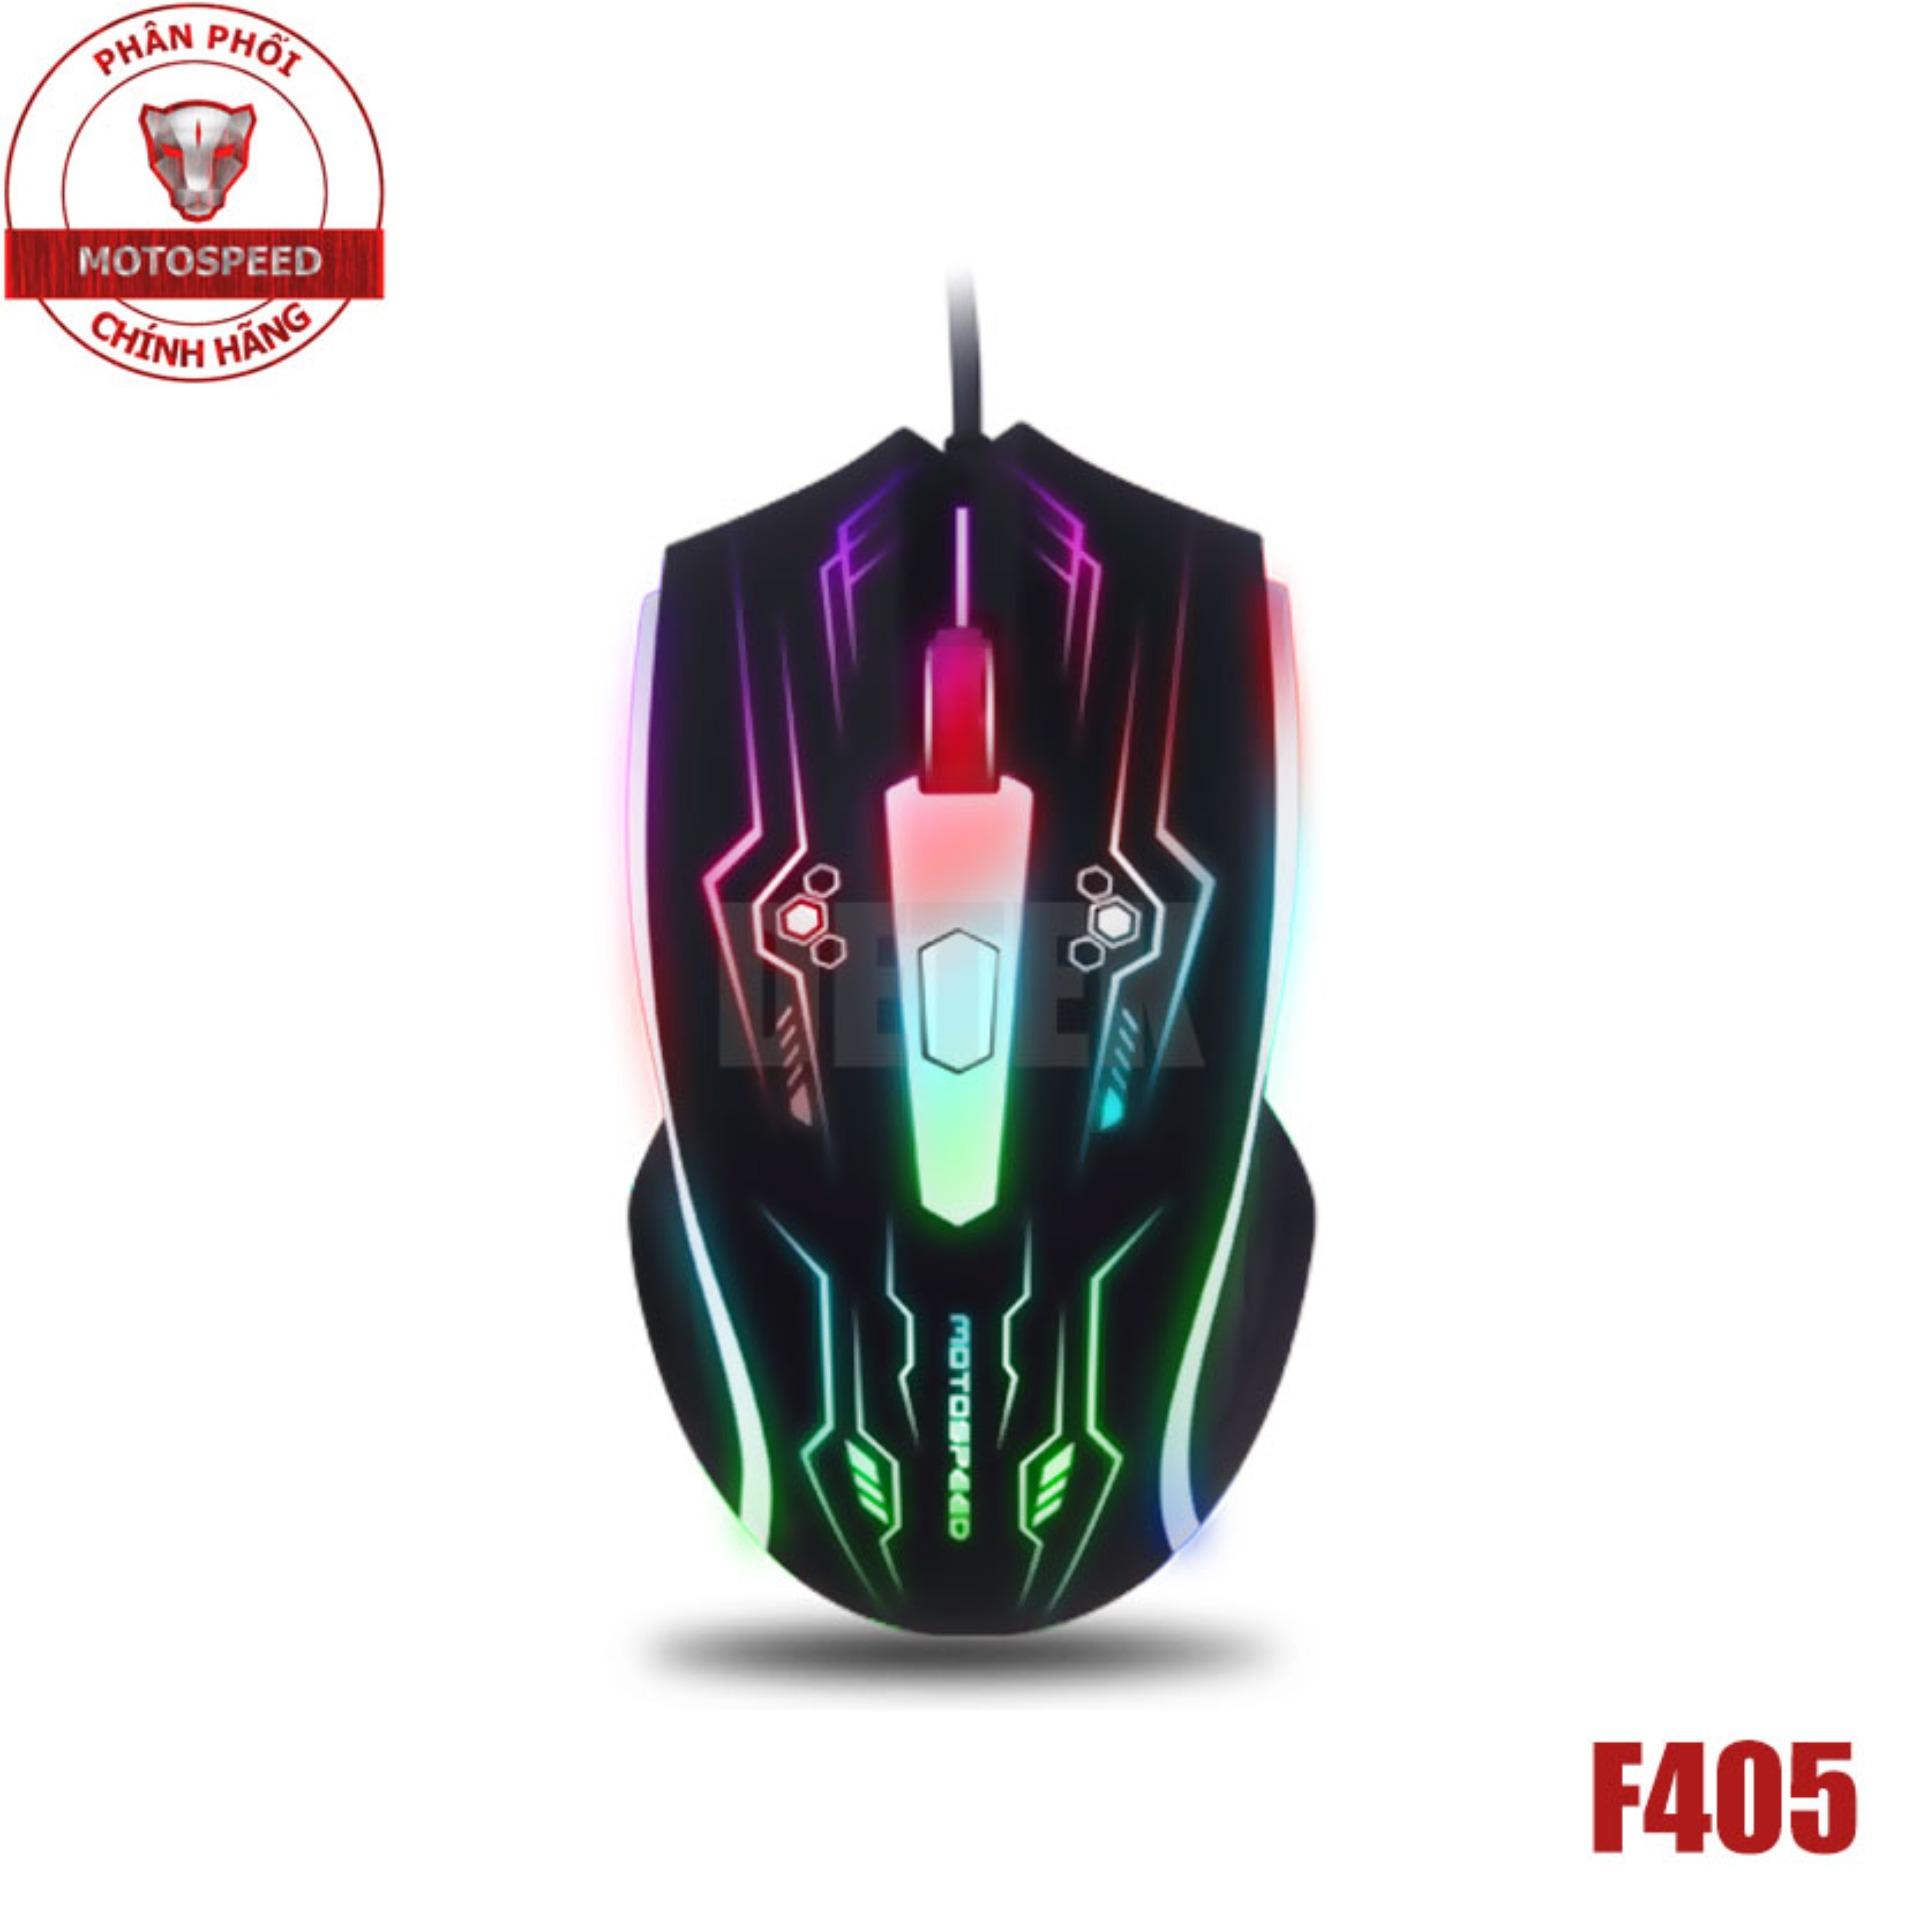 Chuột game thủ Motospeed F405 Optical Gaming Mouse 1600 DPI